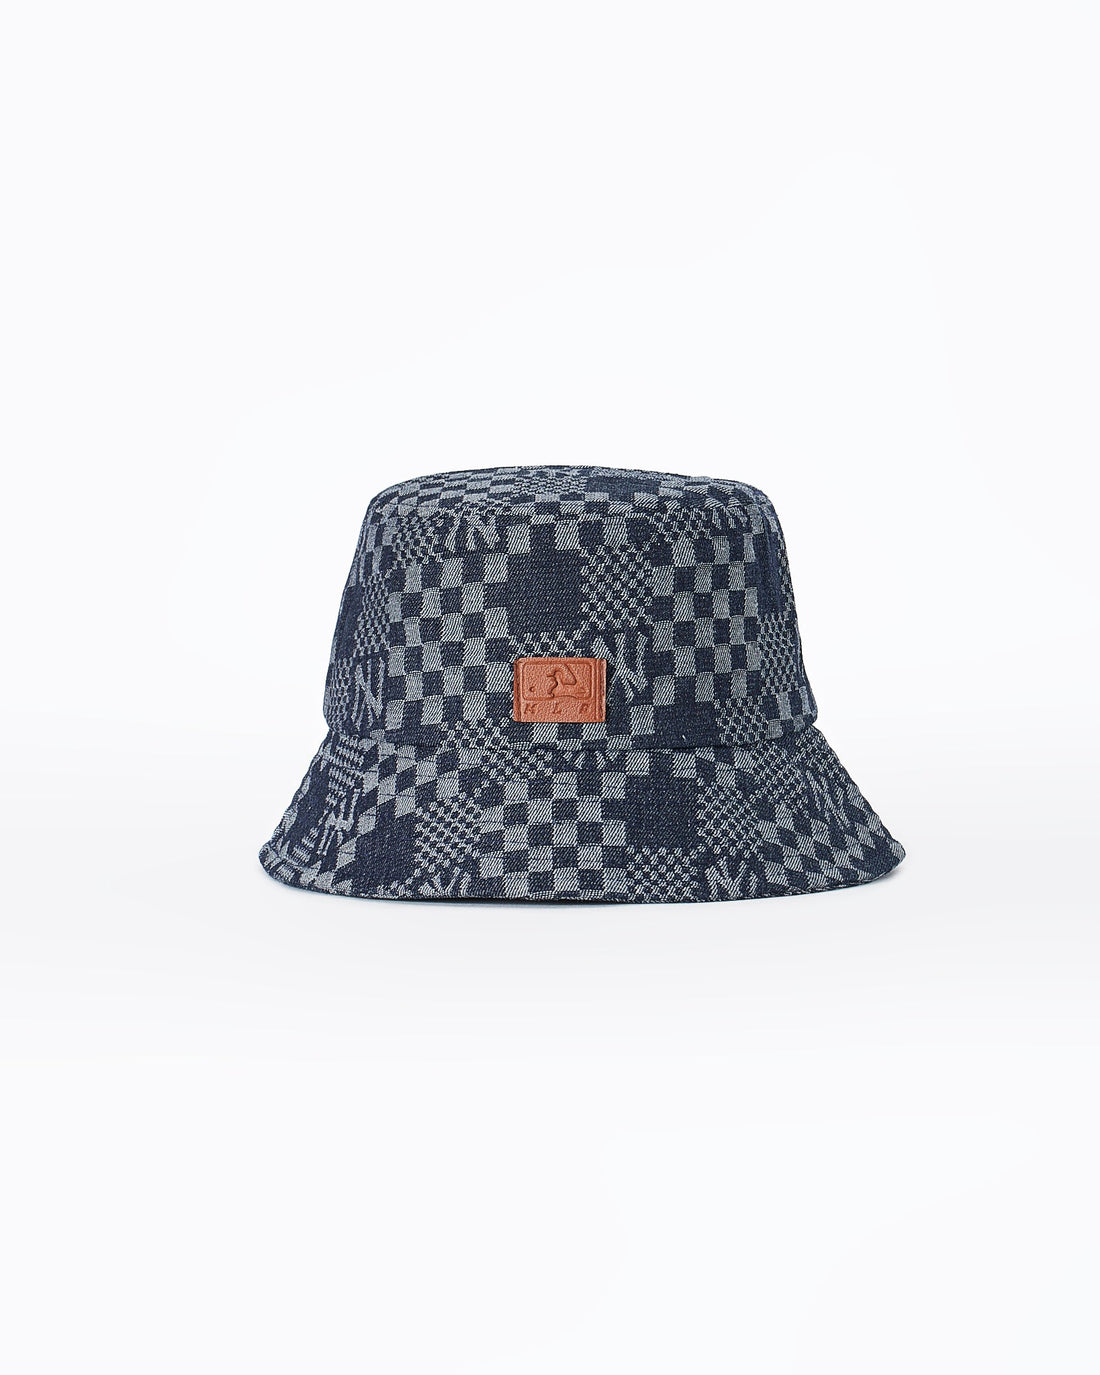 NY Monogram Over Printed Bucket Hat 13.90 - MOI OUTFIT